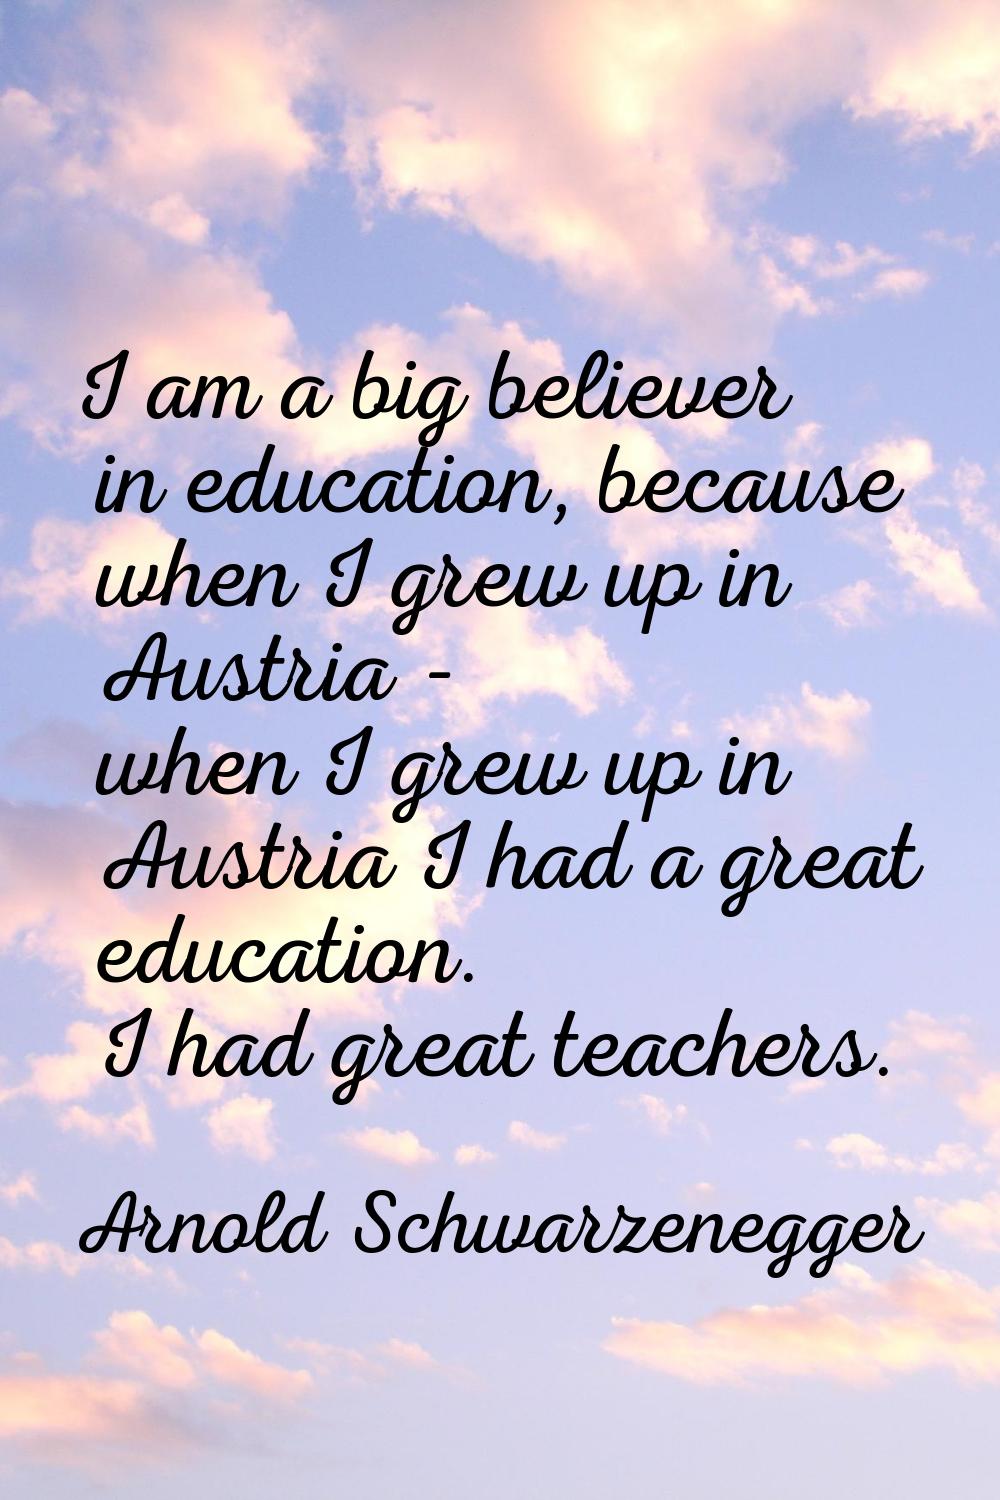 I am a big believer in education, because when I grew up in Austria - when I grew up in Austria I h